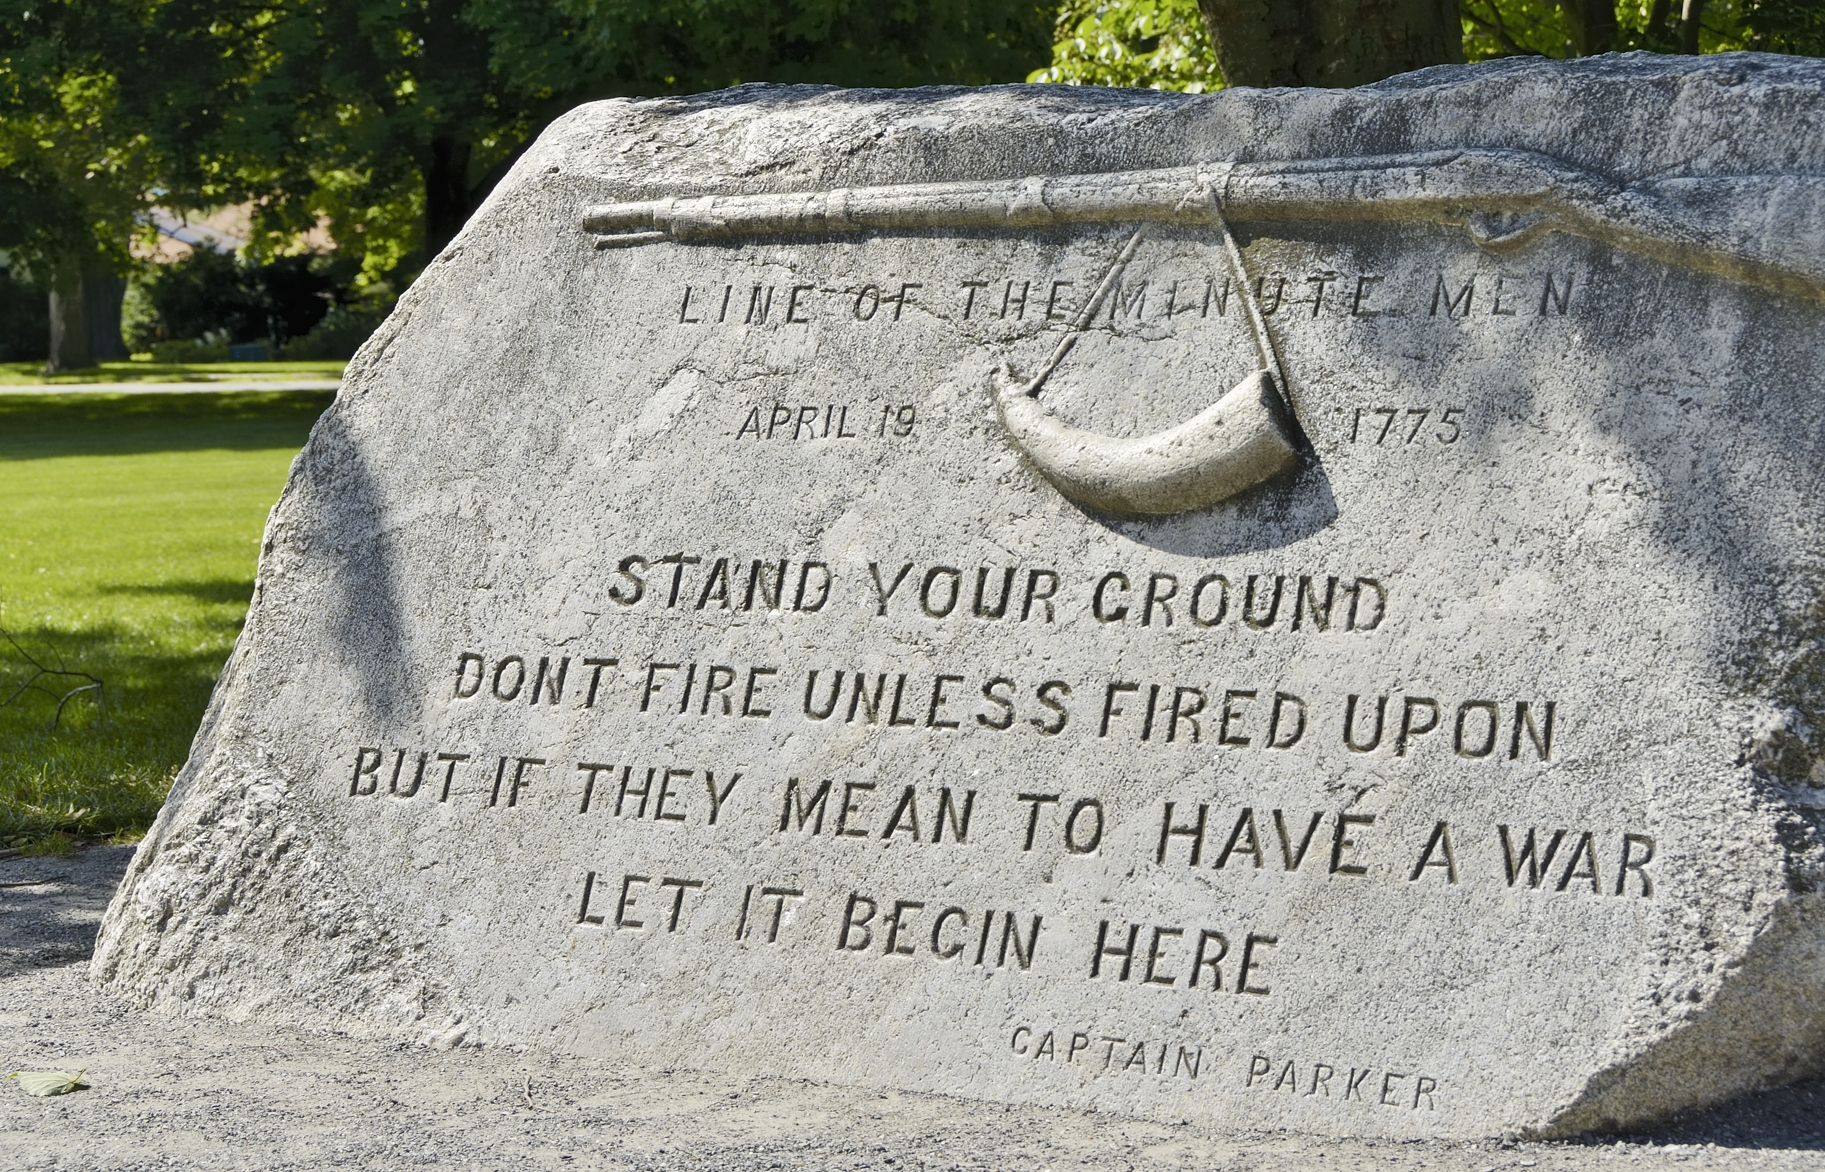 A monument dedicated to the Minute Men of the American Revolution in Concord, Massachusetts.